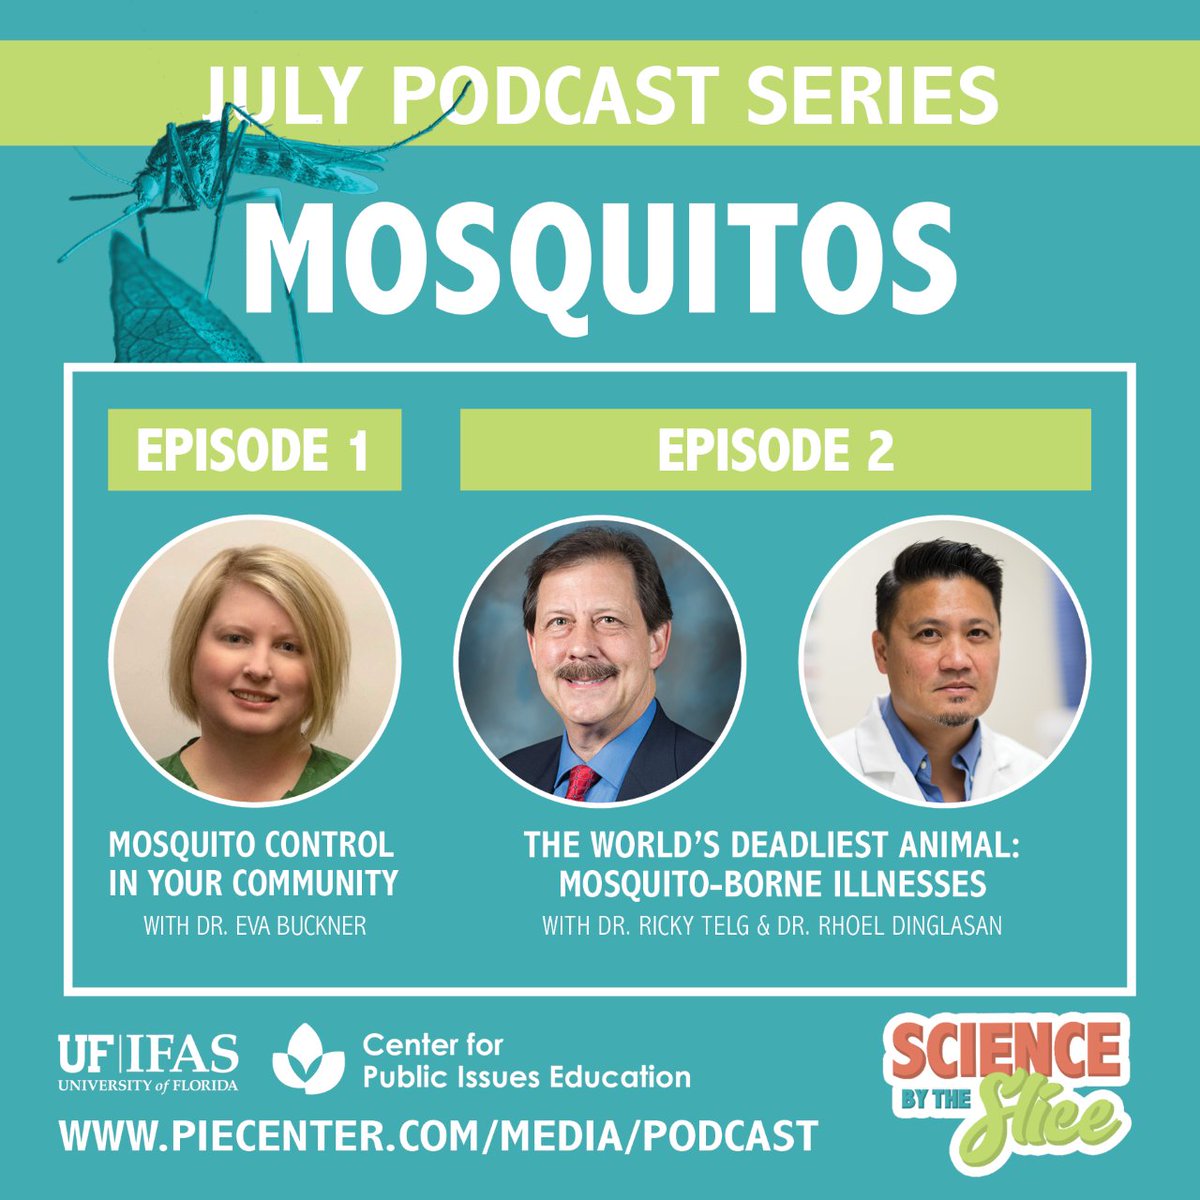 @FloridaMosquito, @AMCAtweets, @_SOVE_, @EntsocAmerica, Check out UF/IFAS PIE Center's Science by the Slice podcasts on 🦟! In episode 1, I discuss my research and Extension and integrated 🦟 mgmt. I also praise 🦟control and provide mgmt tips for public: piecenter.com/media/podcast/